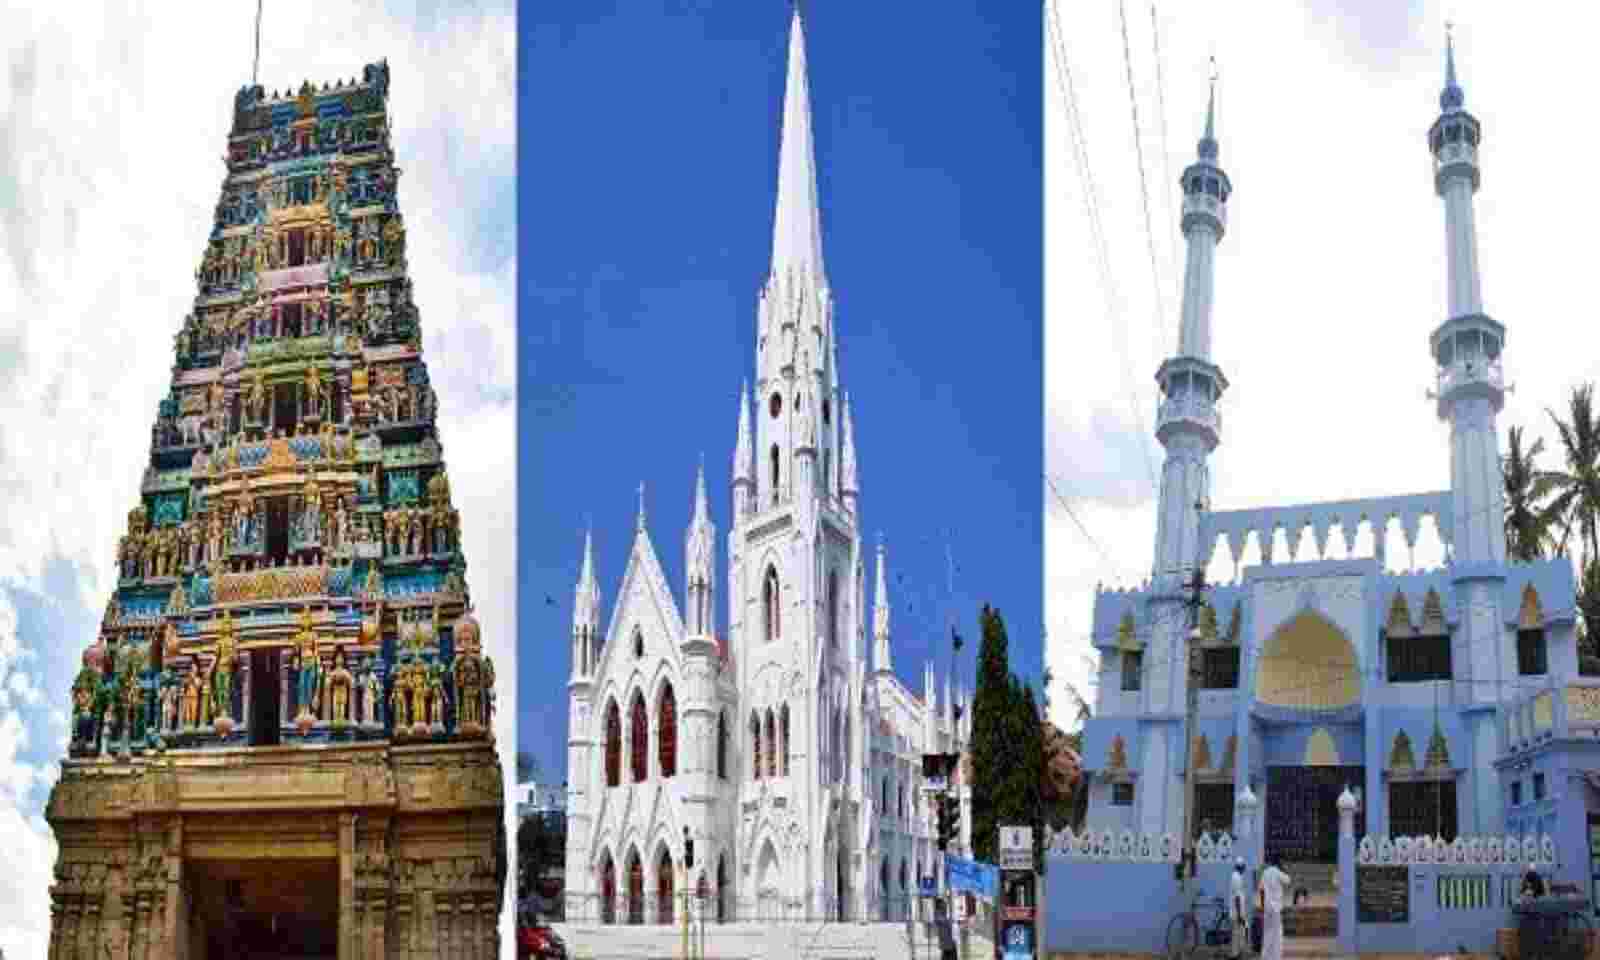 Temples, mosques, churches pay taxes, reports AltNews